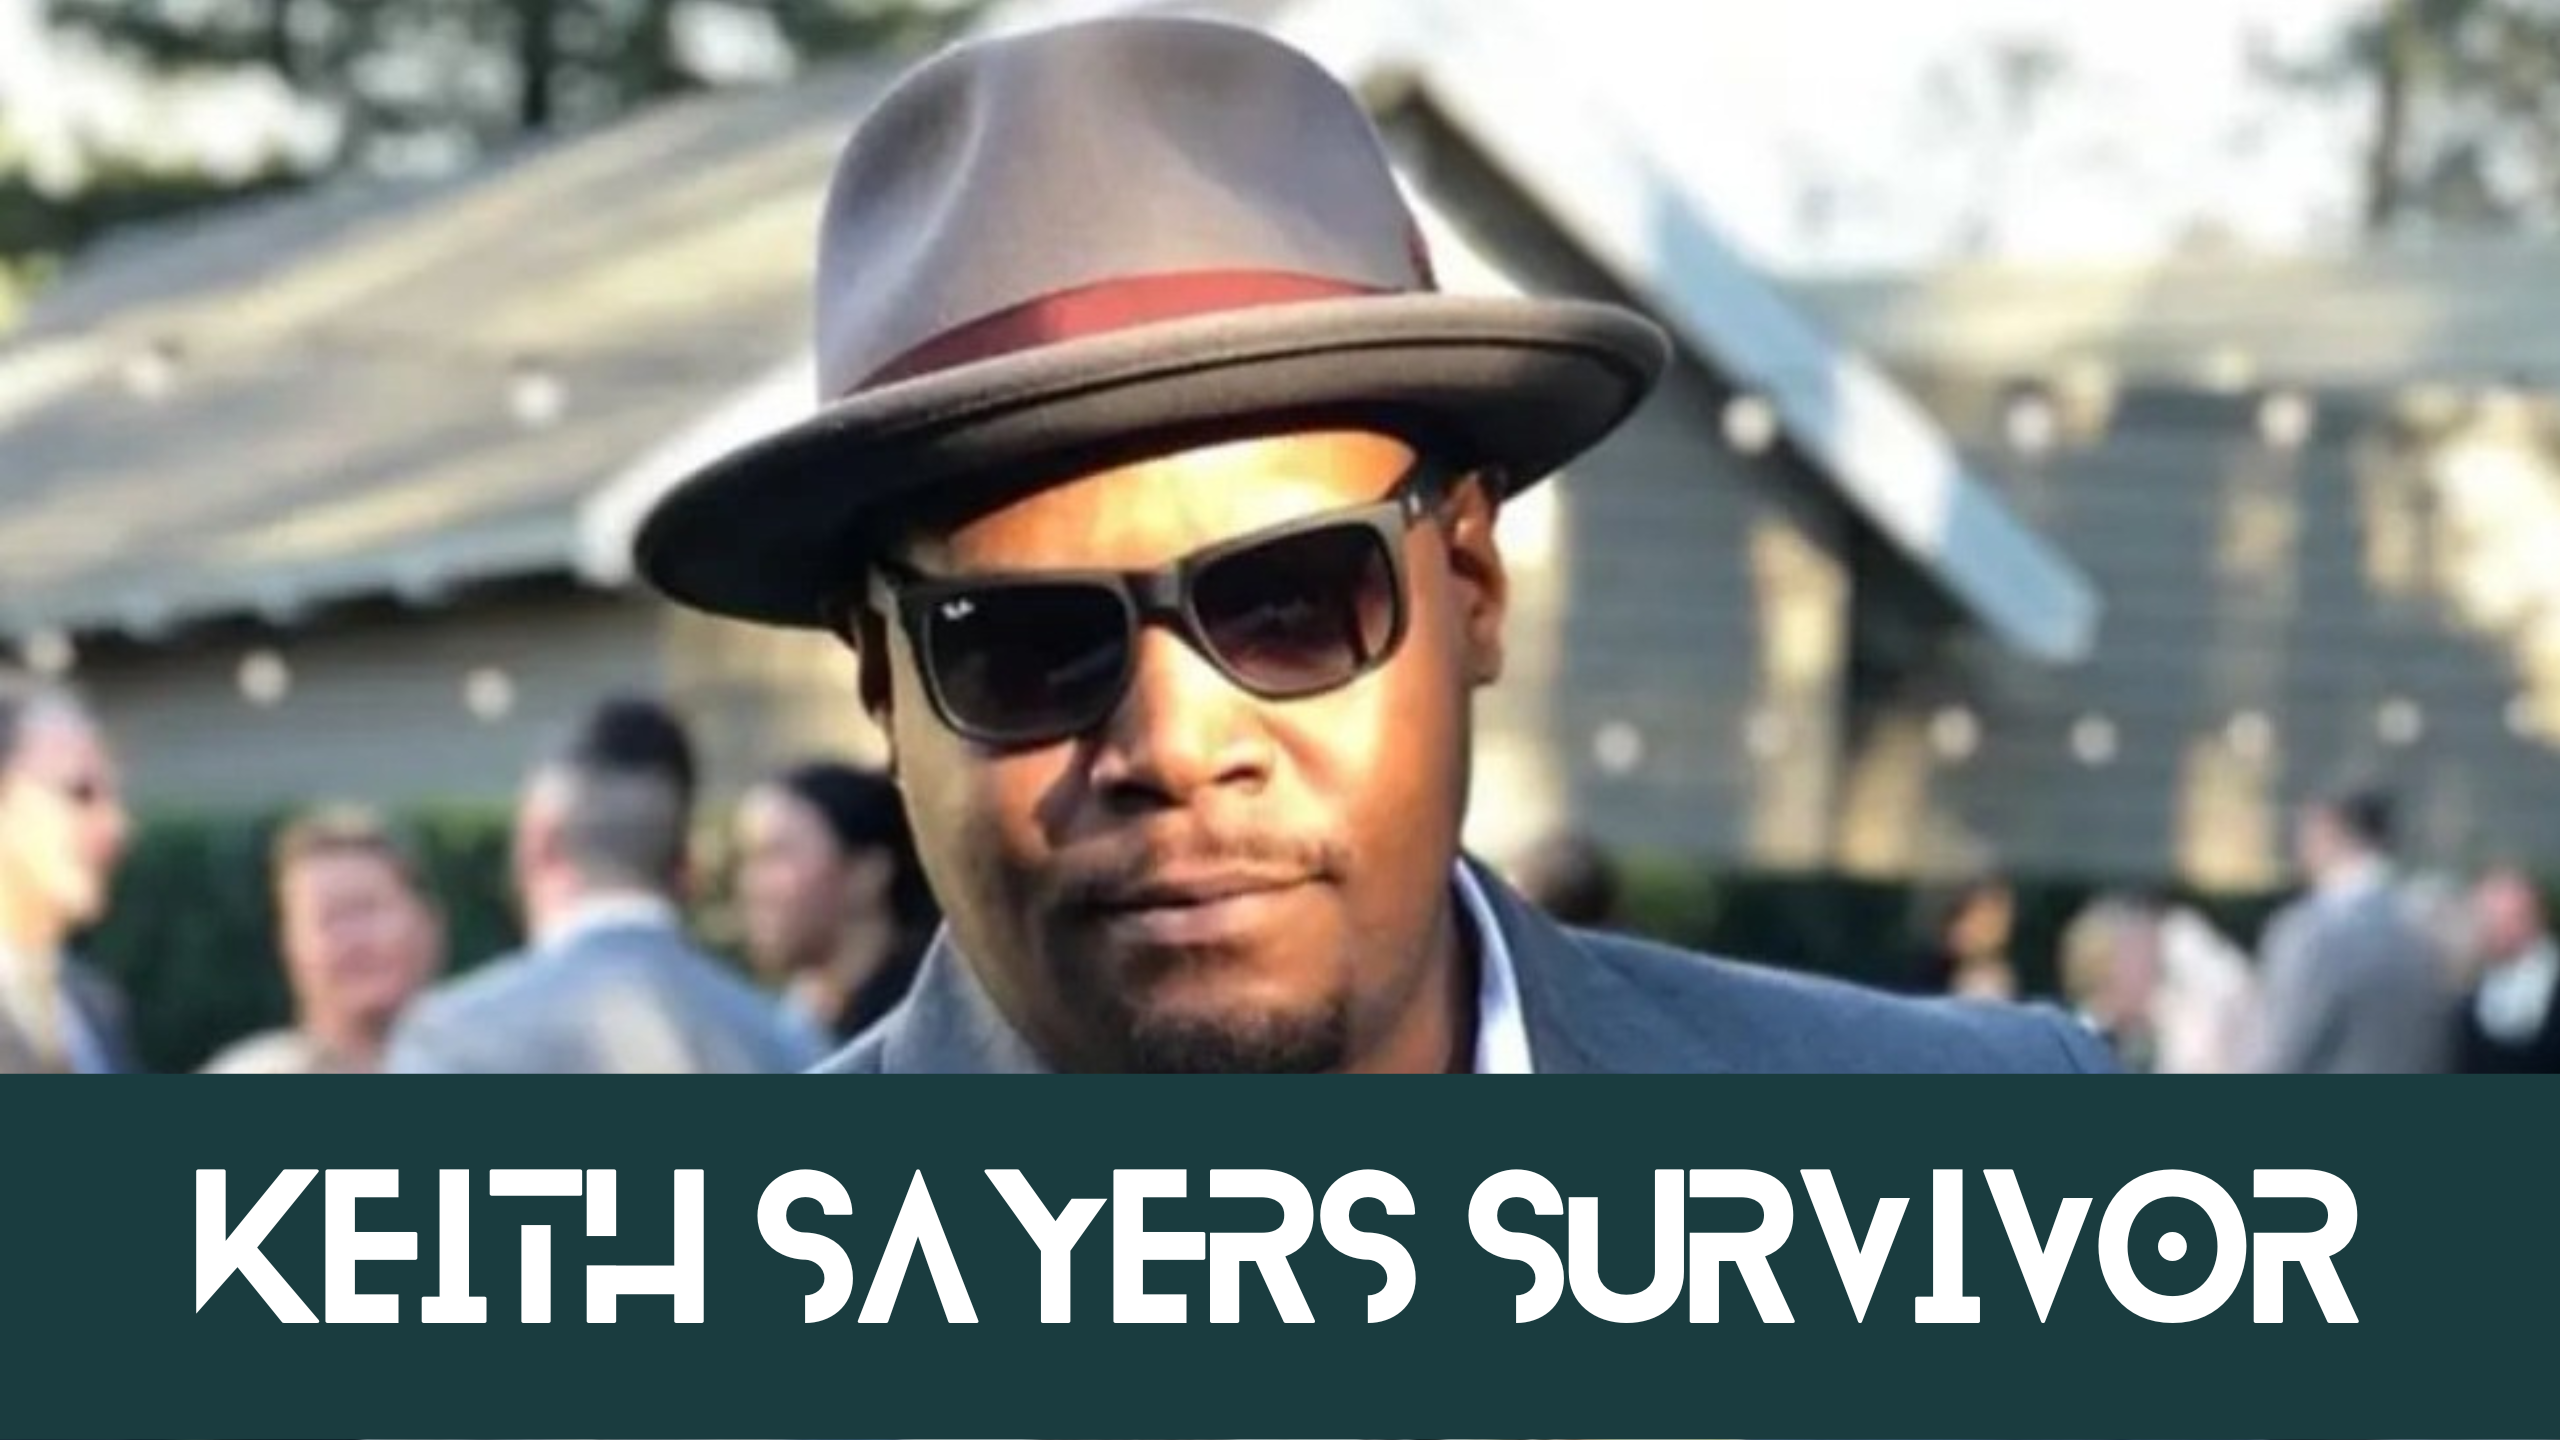 Who Is Keith Sayers Survivor? What Happened To Him?